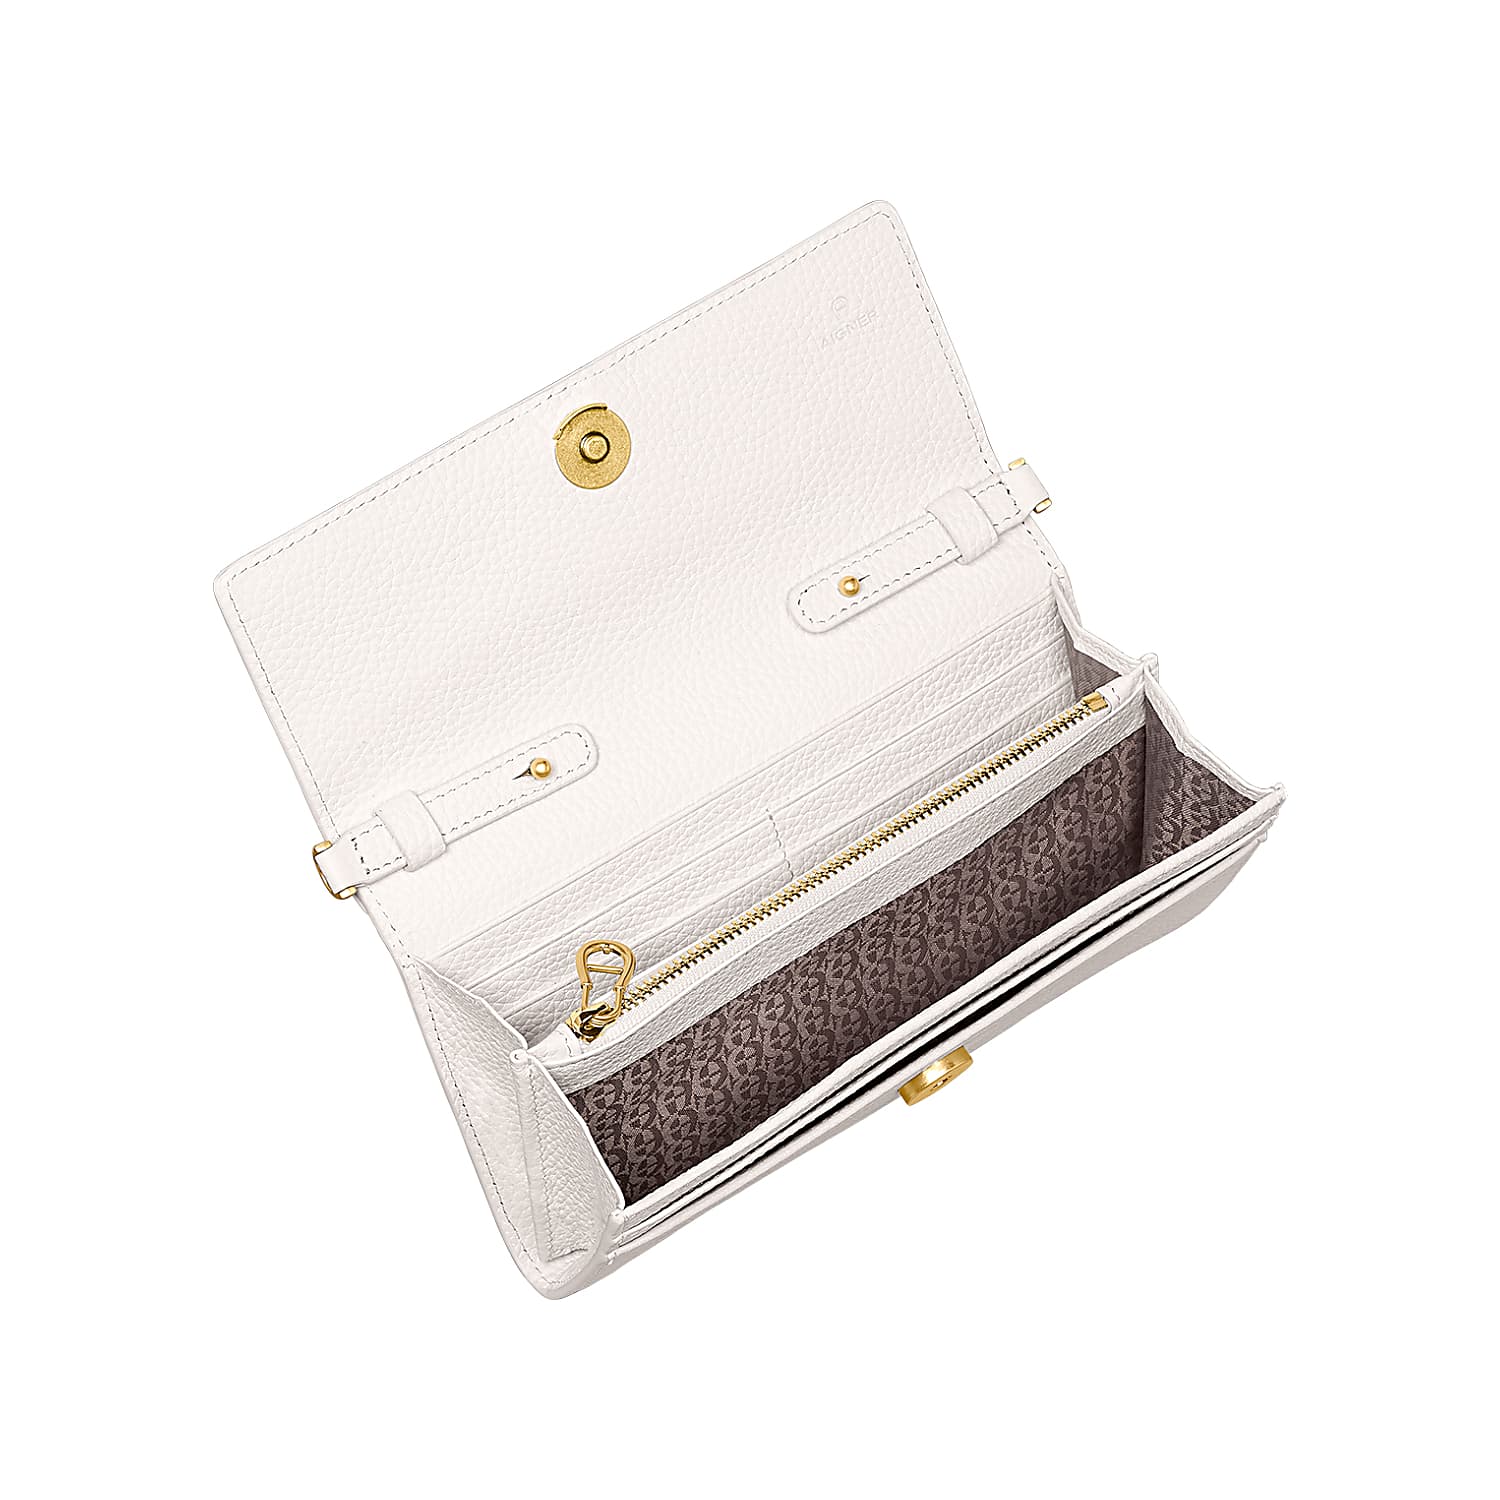 Fashion wallet with handle